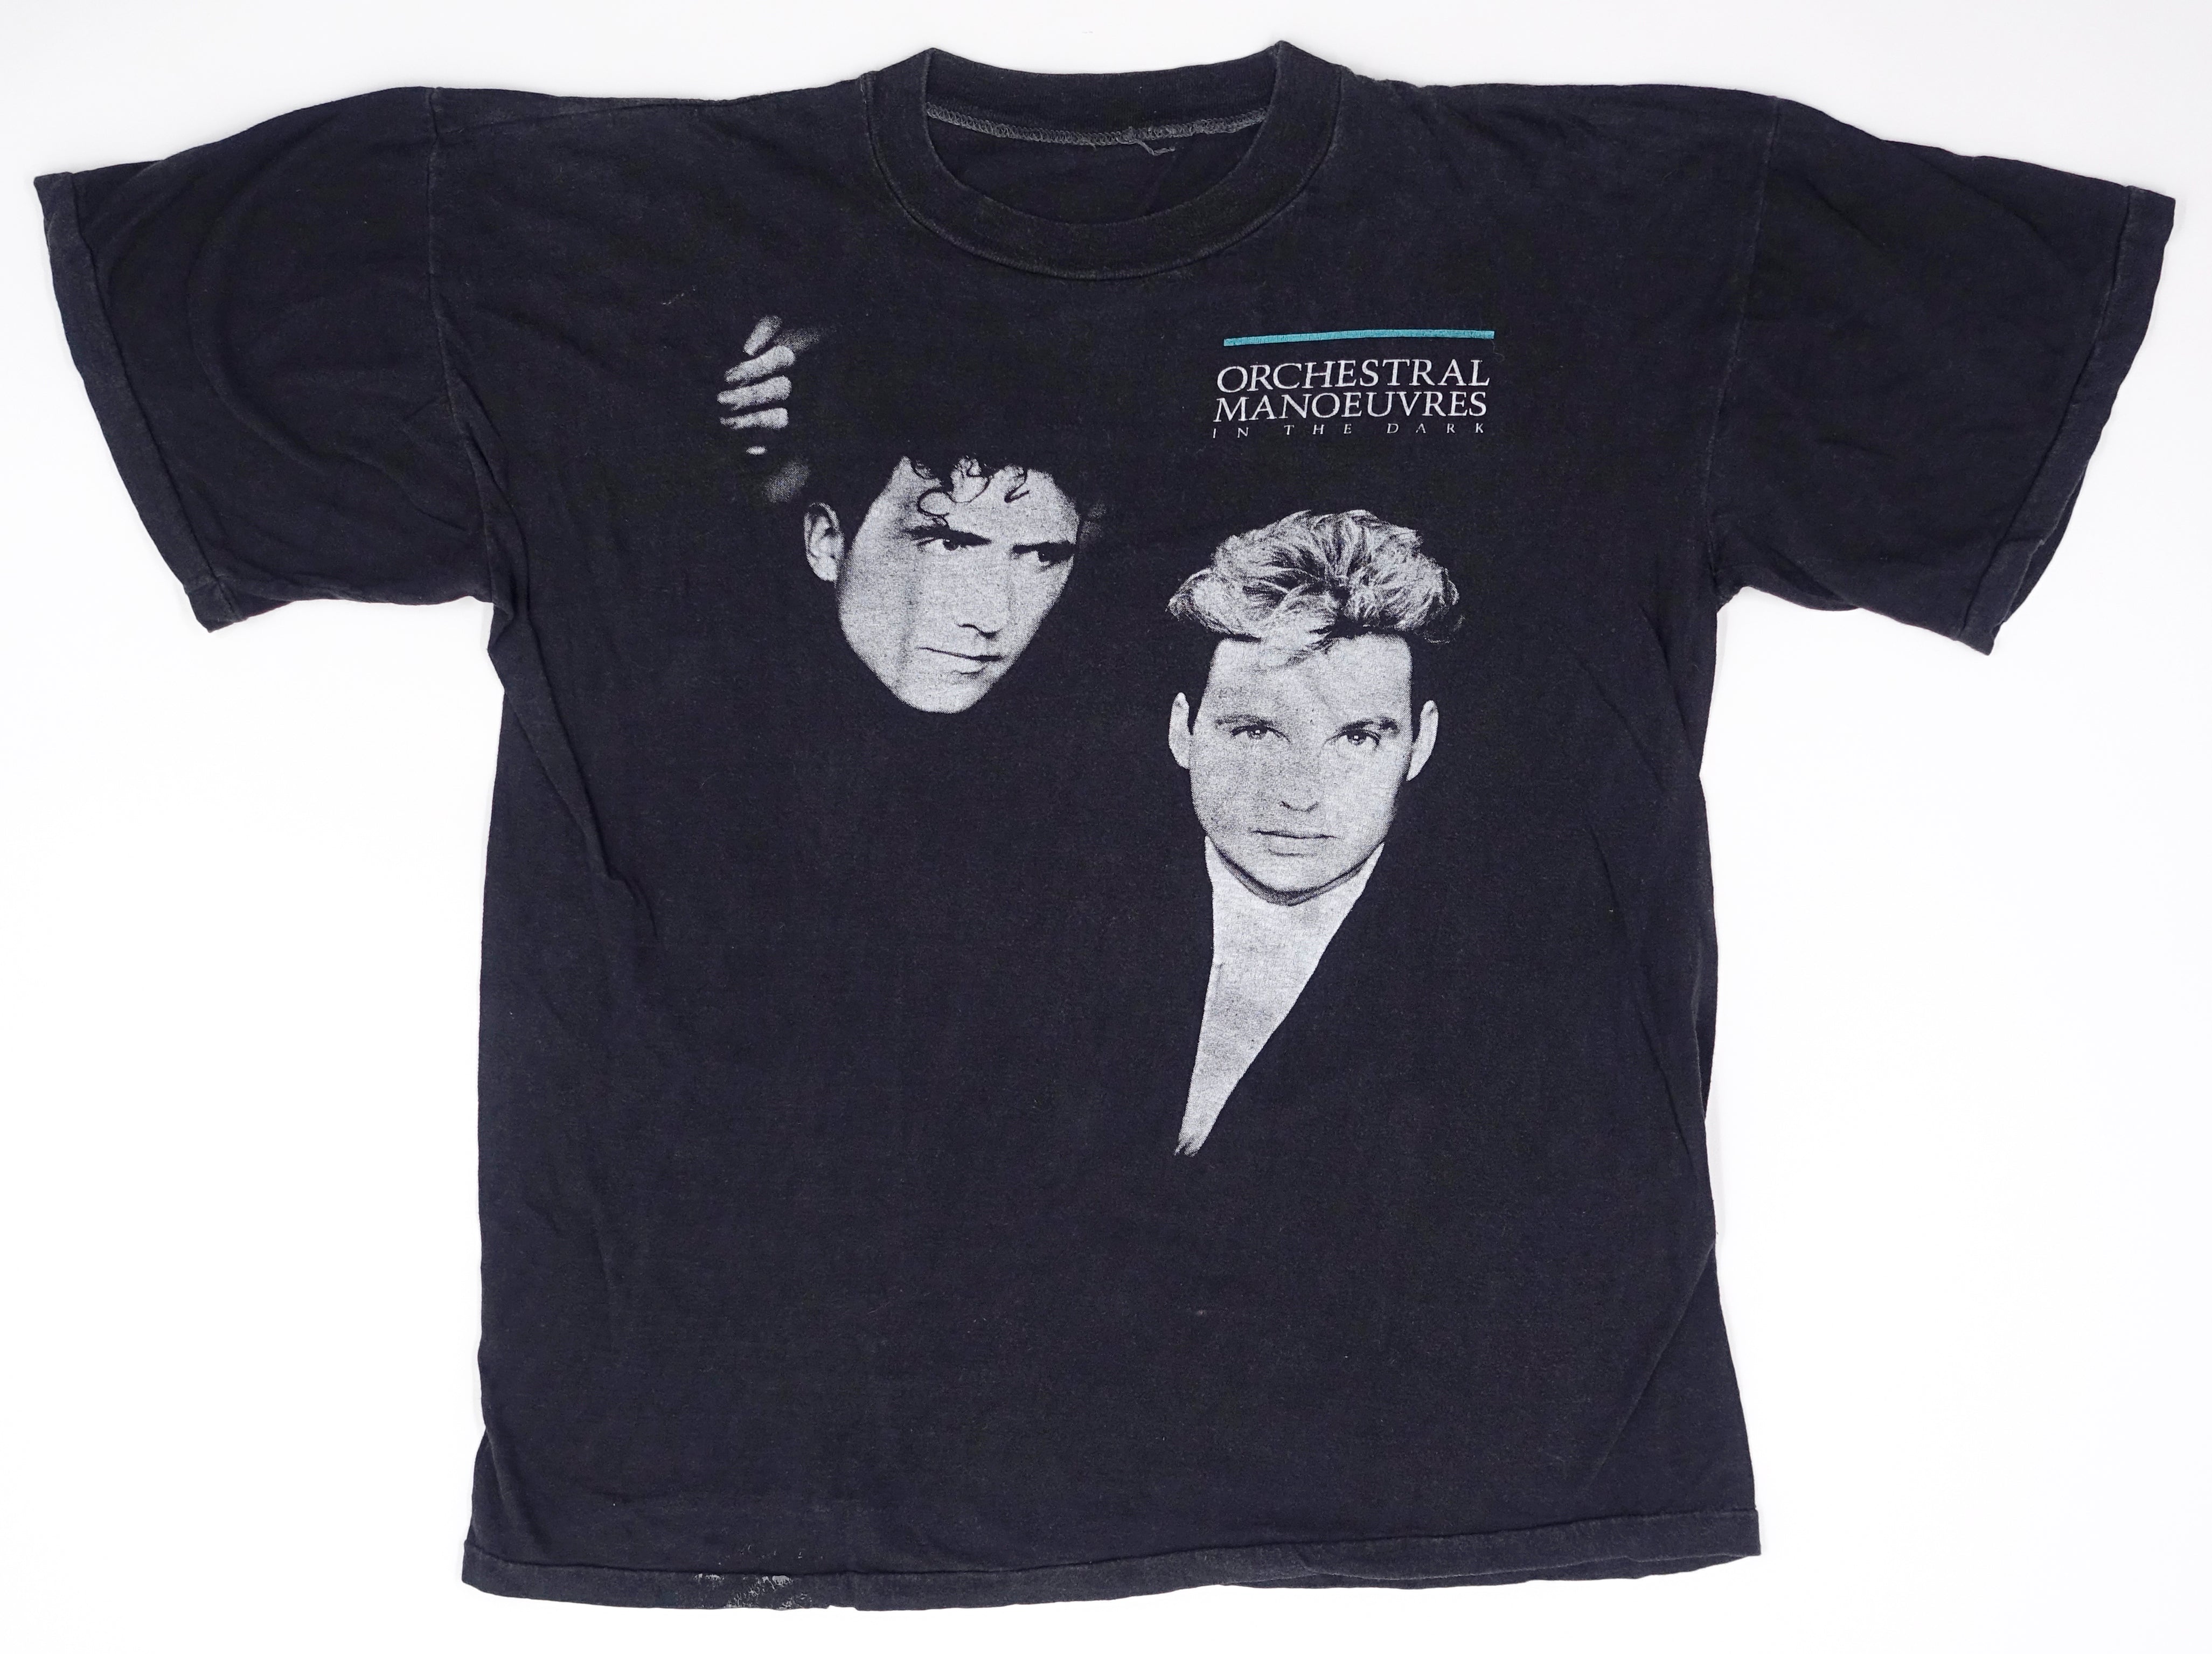 Orchestral Manoeuvres In The Dark (OMD) - The Best Of OMD 1988 Tour Shirt (No Backprint) Size XL